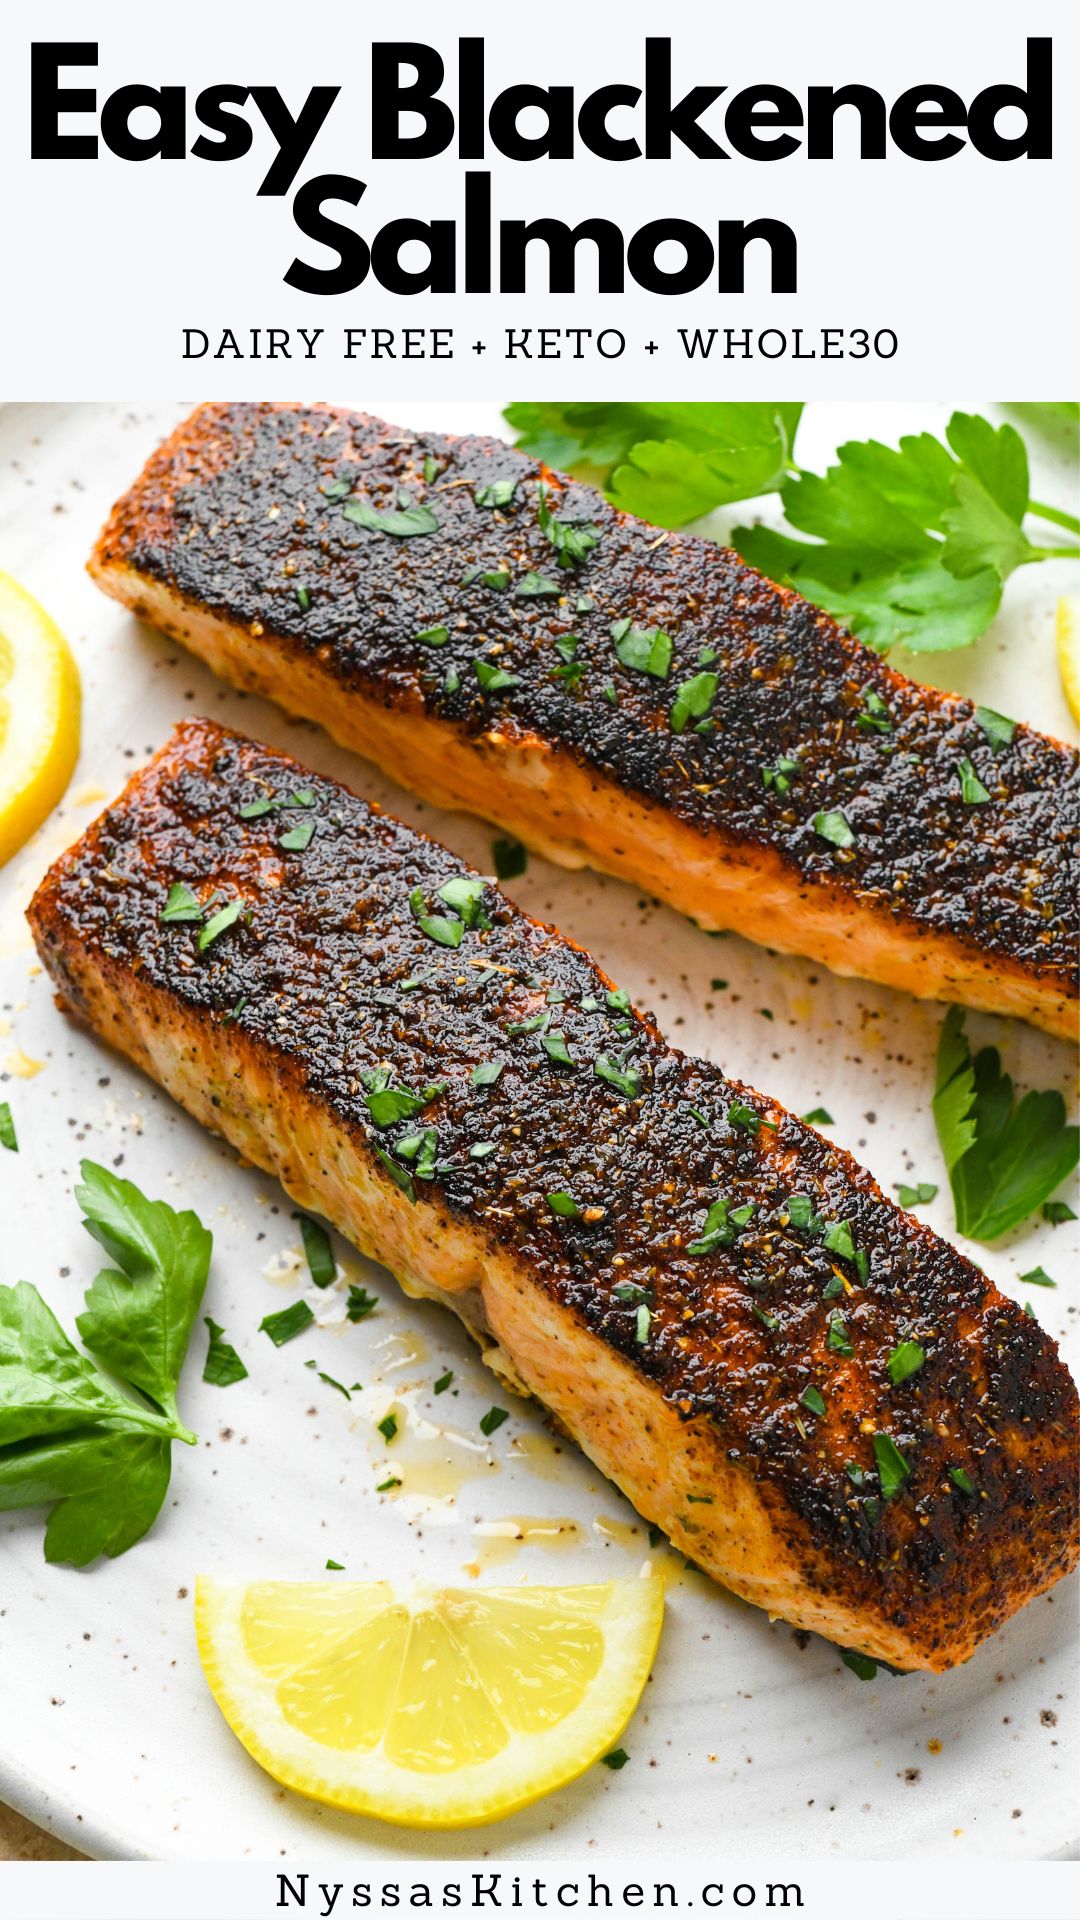 This blackened salmon is a bold and flavorful way to cook salmon for your next family dinner! Made with a simple homemade blackening seasoning and baked in the oven until perfectly cooked. The recipe makes two servings but can easily be doubled to serve four! Gluten free, dairy free, Whole30, paleo, and keto friendly.